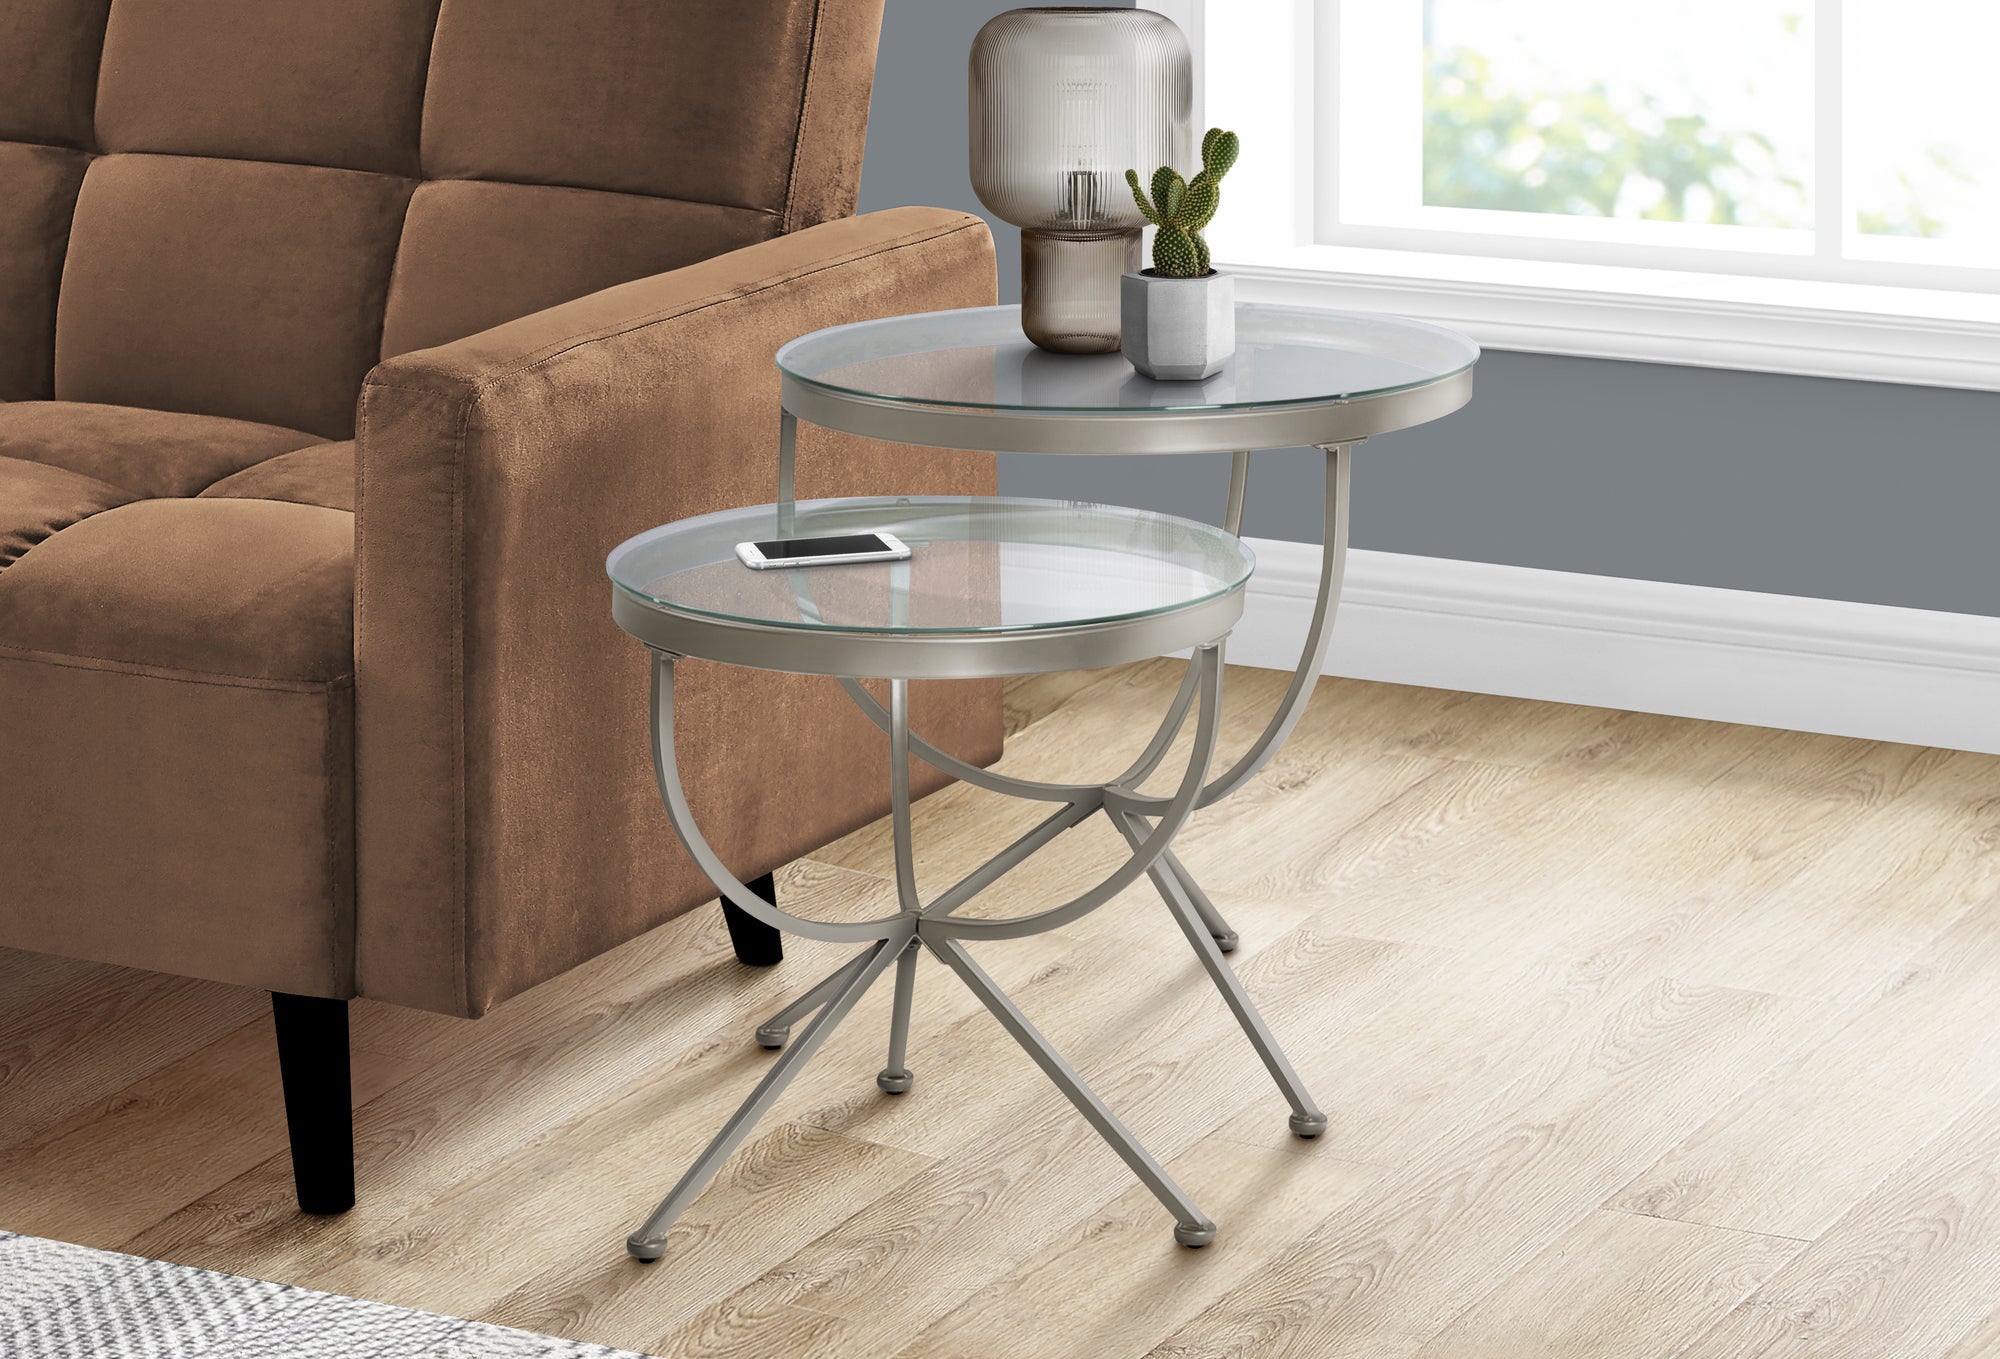 MN-273322    Nesting Table, Set Of 2, Side, End, Tempered Glass, Accent, Living Room, Bedroom, Metal Base, Tempered Glass, Clear, Silver, Contemporary, Modern